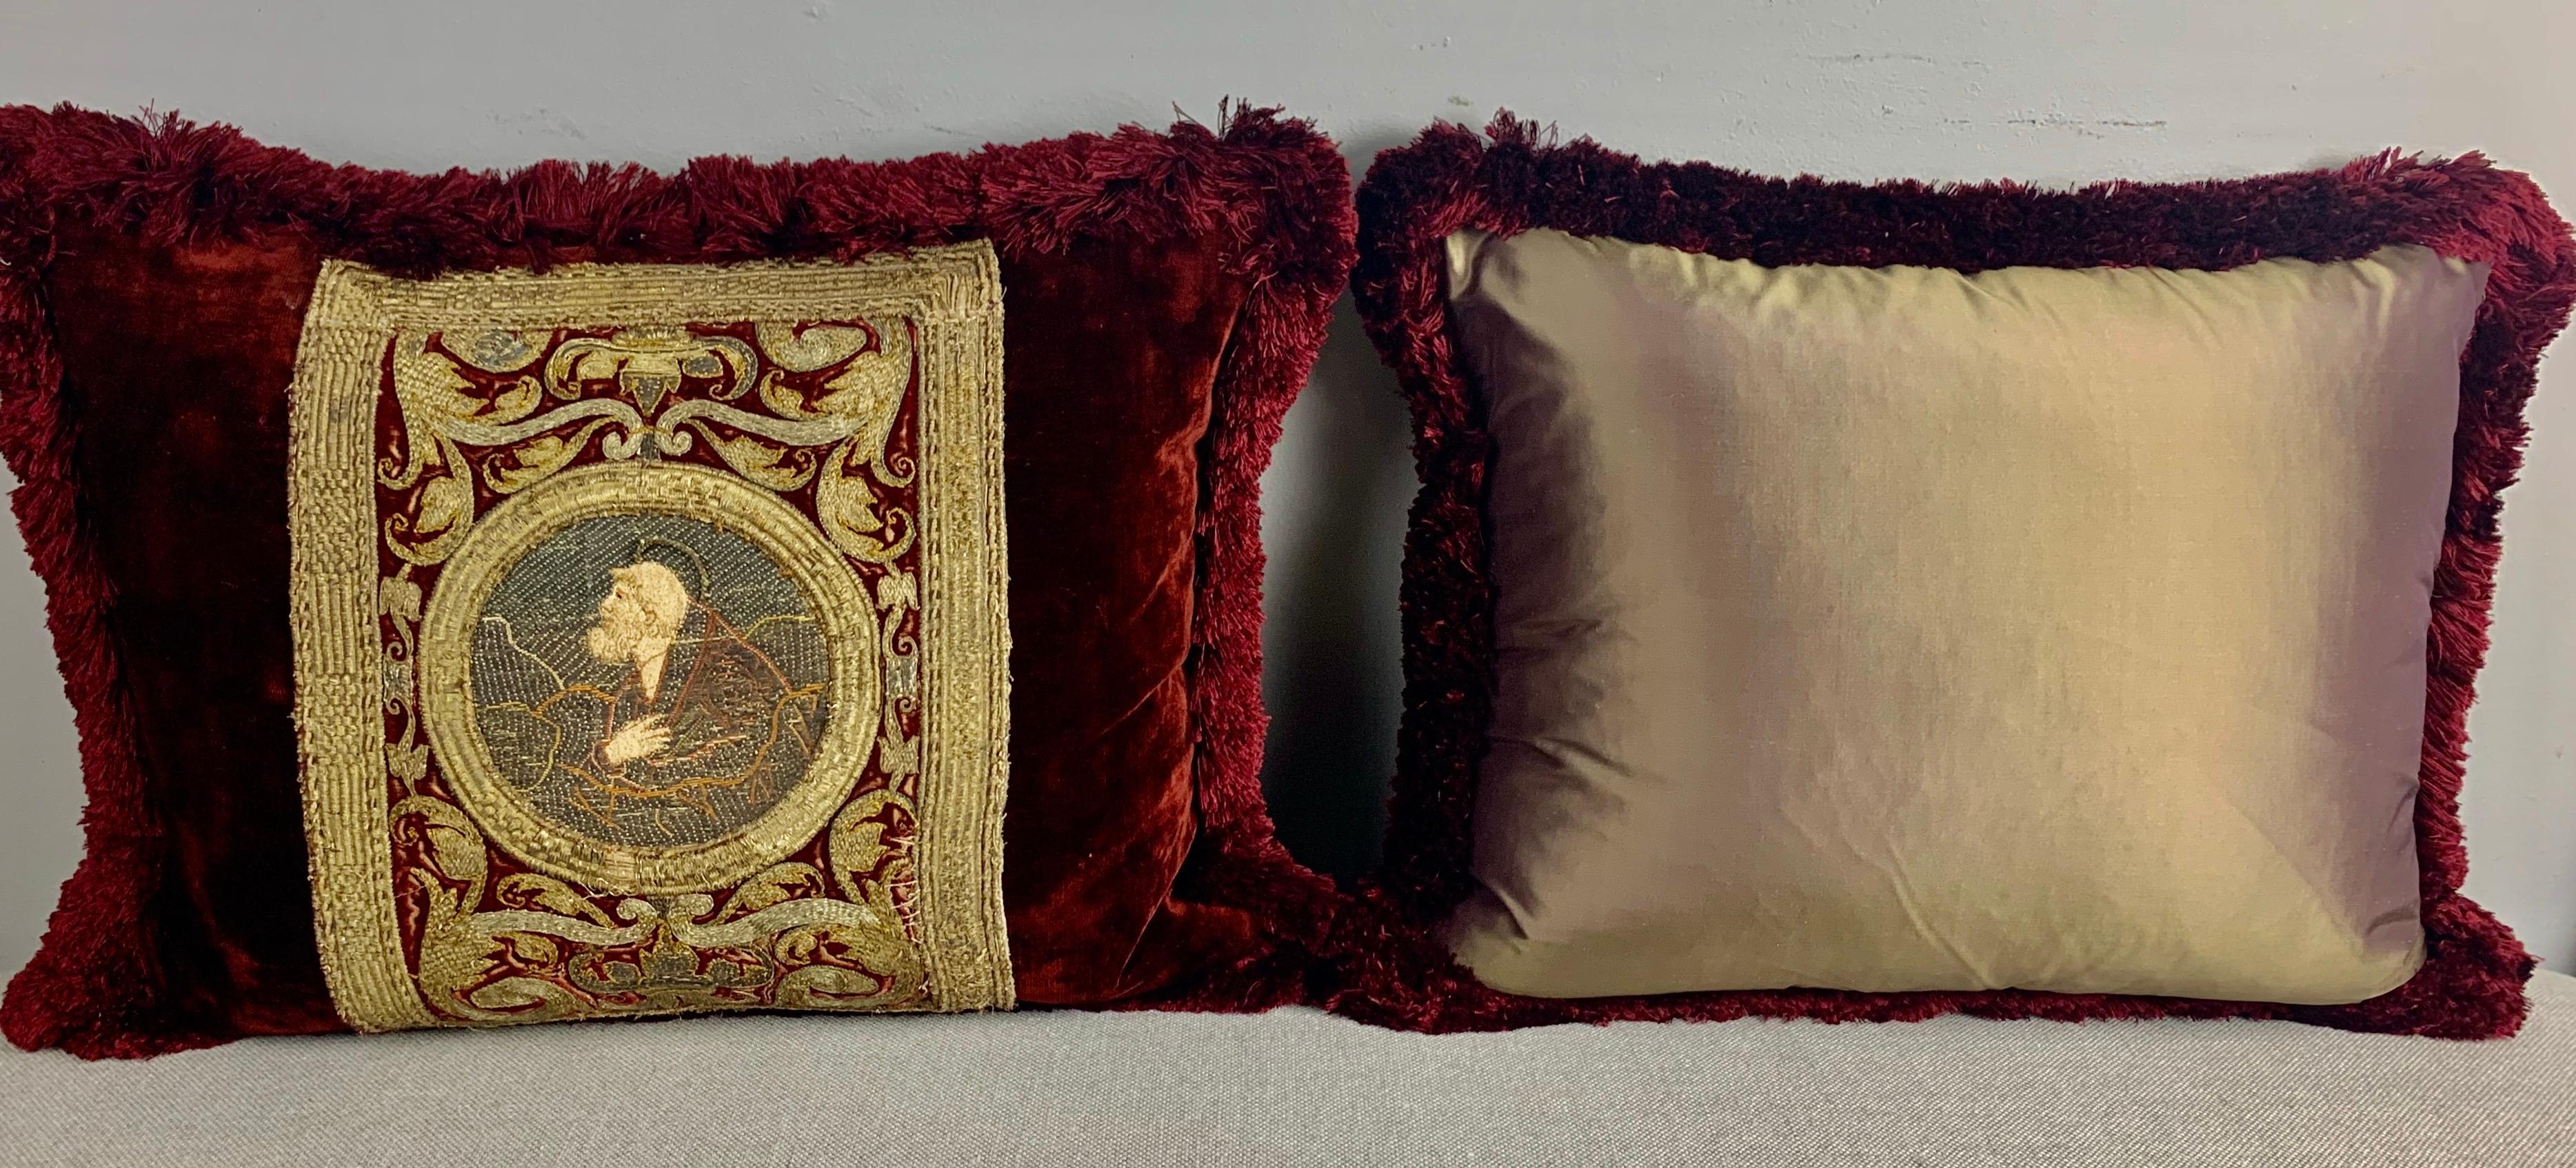 Pair of 18th Century Metallic Embroidered Red Velvet Pillows 10